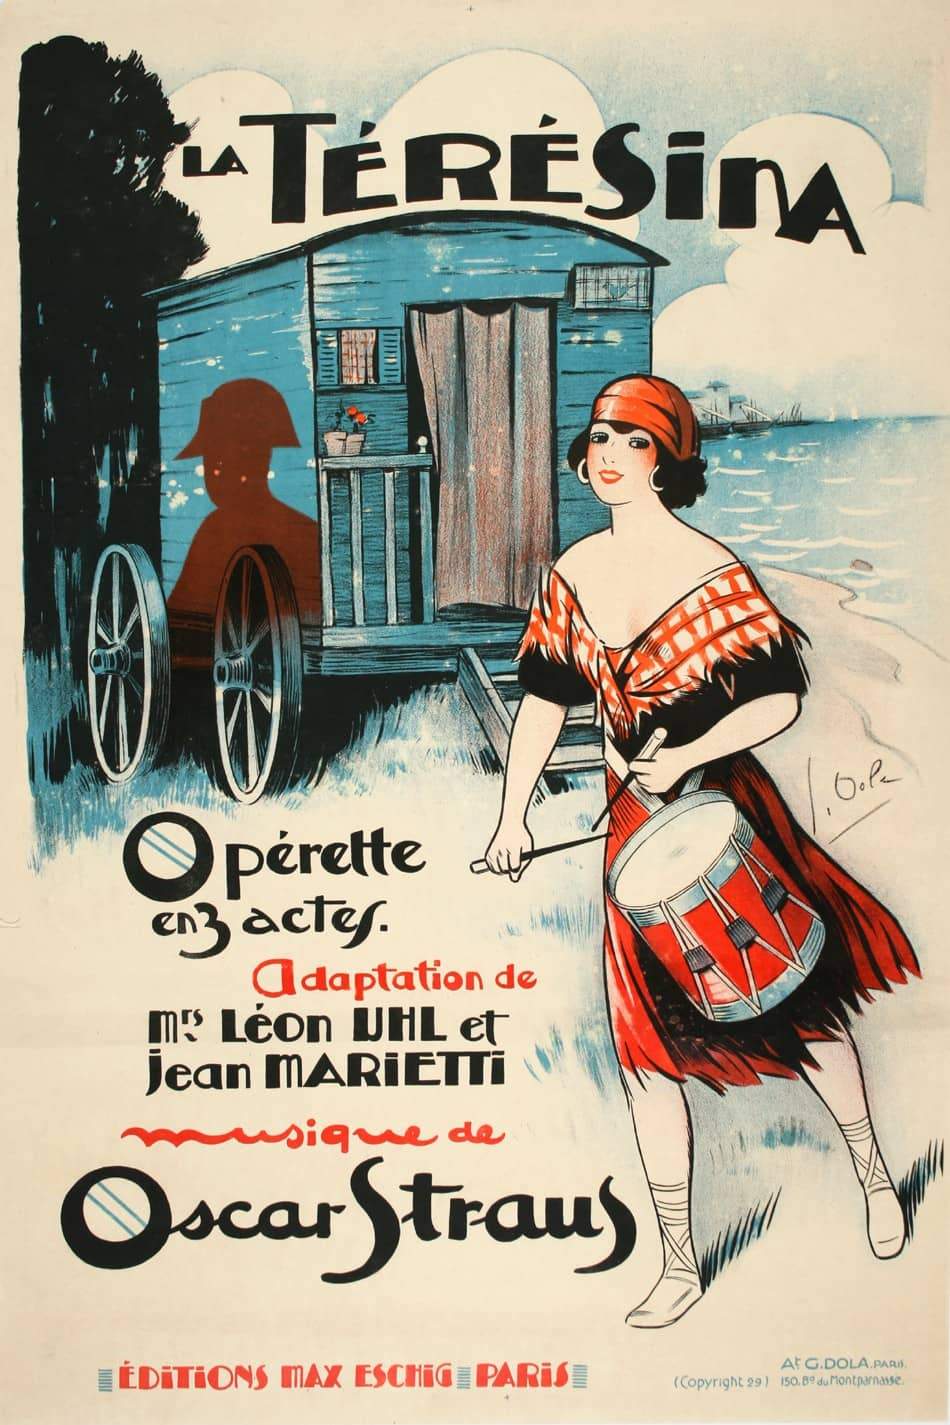 La Teresina French Operetta Poster c1930 by Georges Dola